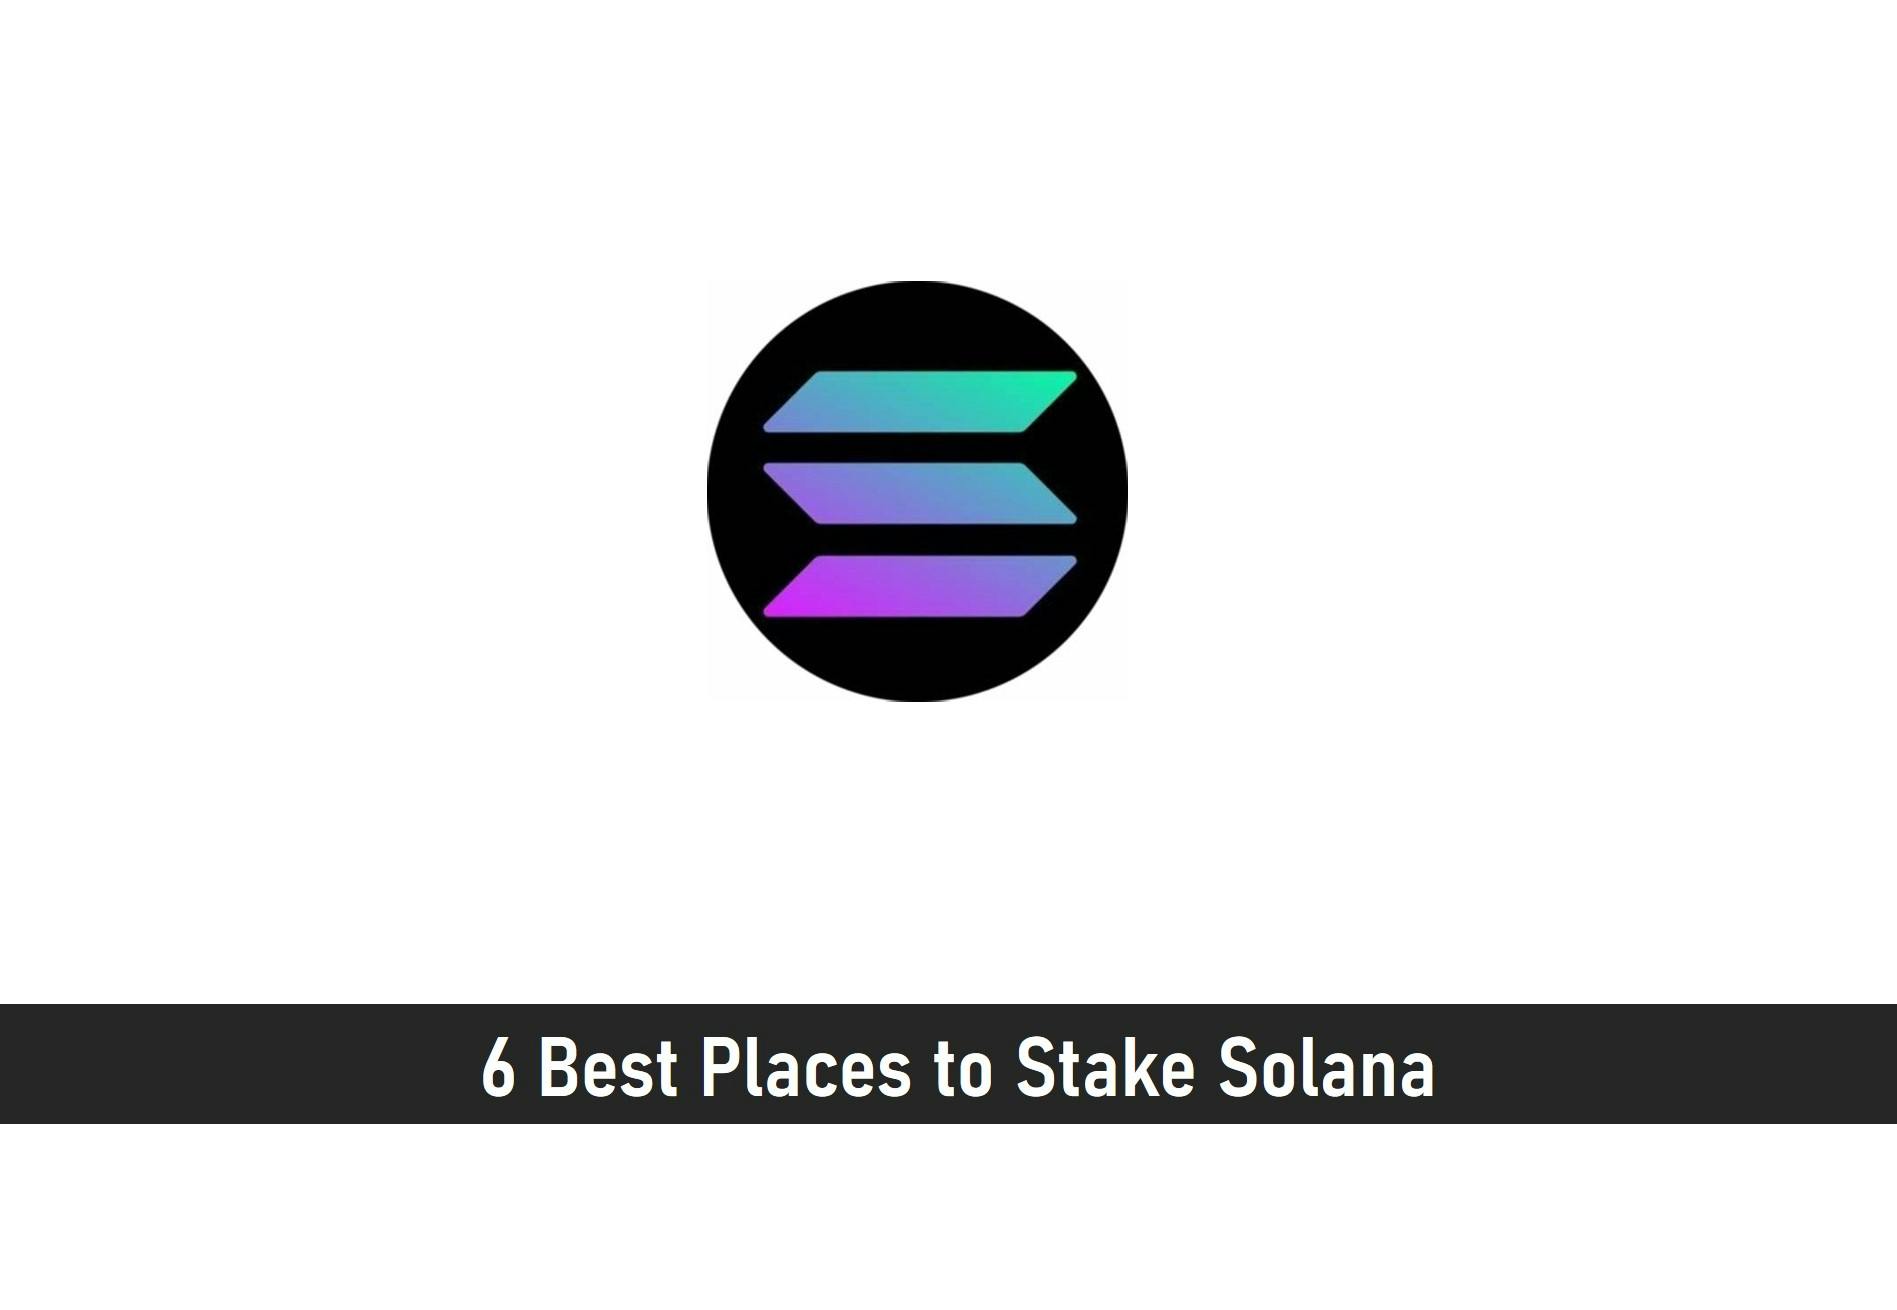 6 Best Places to Stake Solana